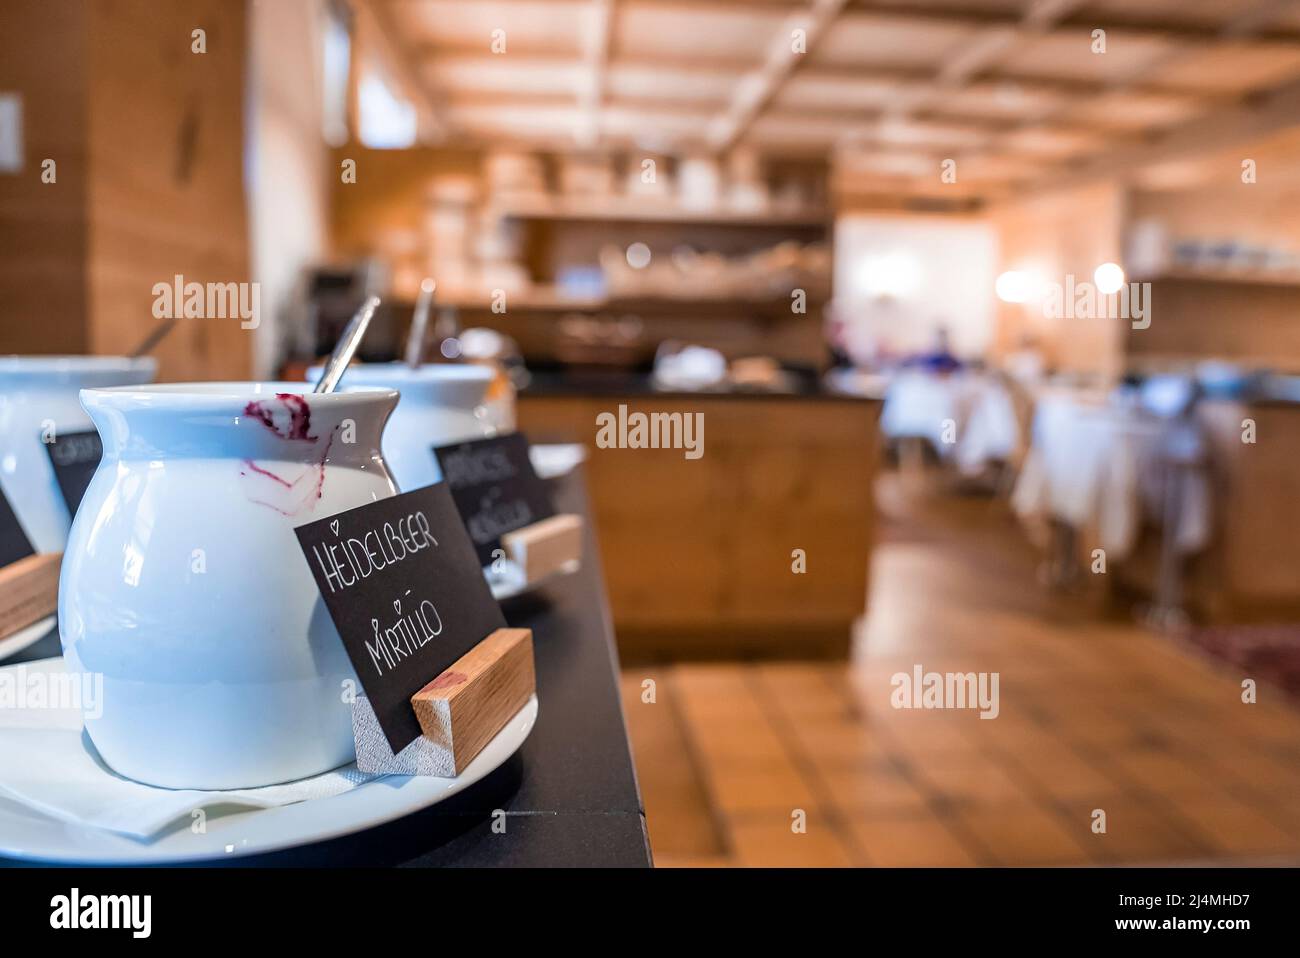 Ceramic jars with labels placed on counter at modern luxury restaurant Stock Photo